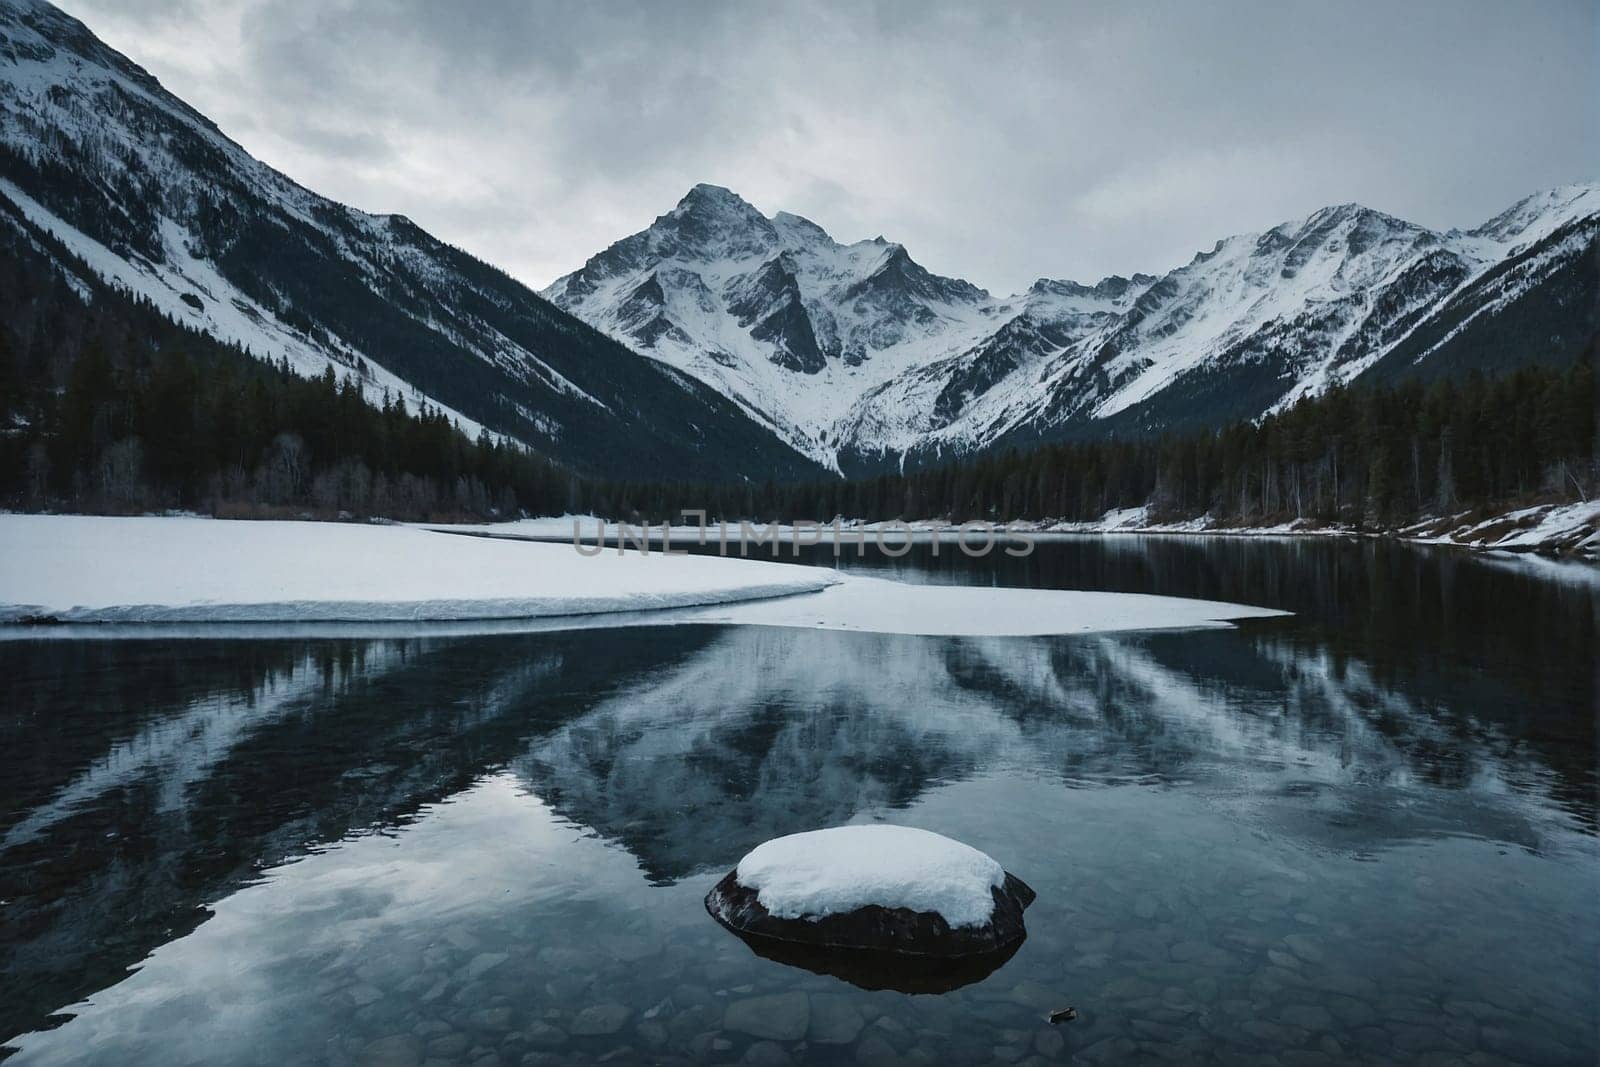 A mountain lake sits nestled amidst snow-covered mountains, creating a breathtaking scene of natural beauty.